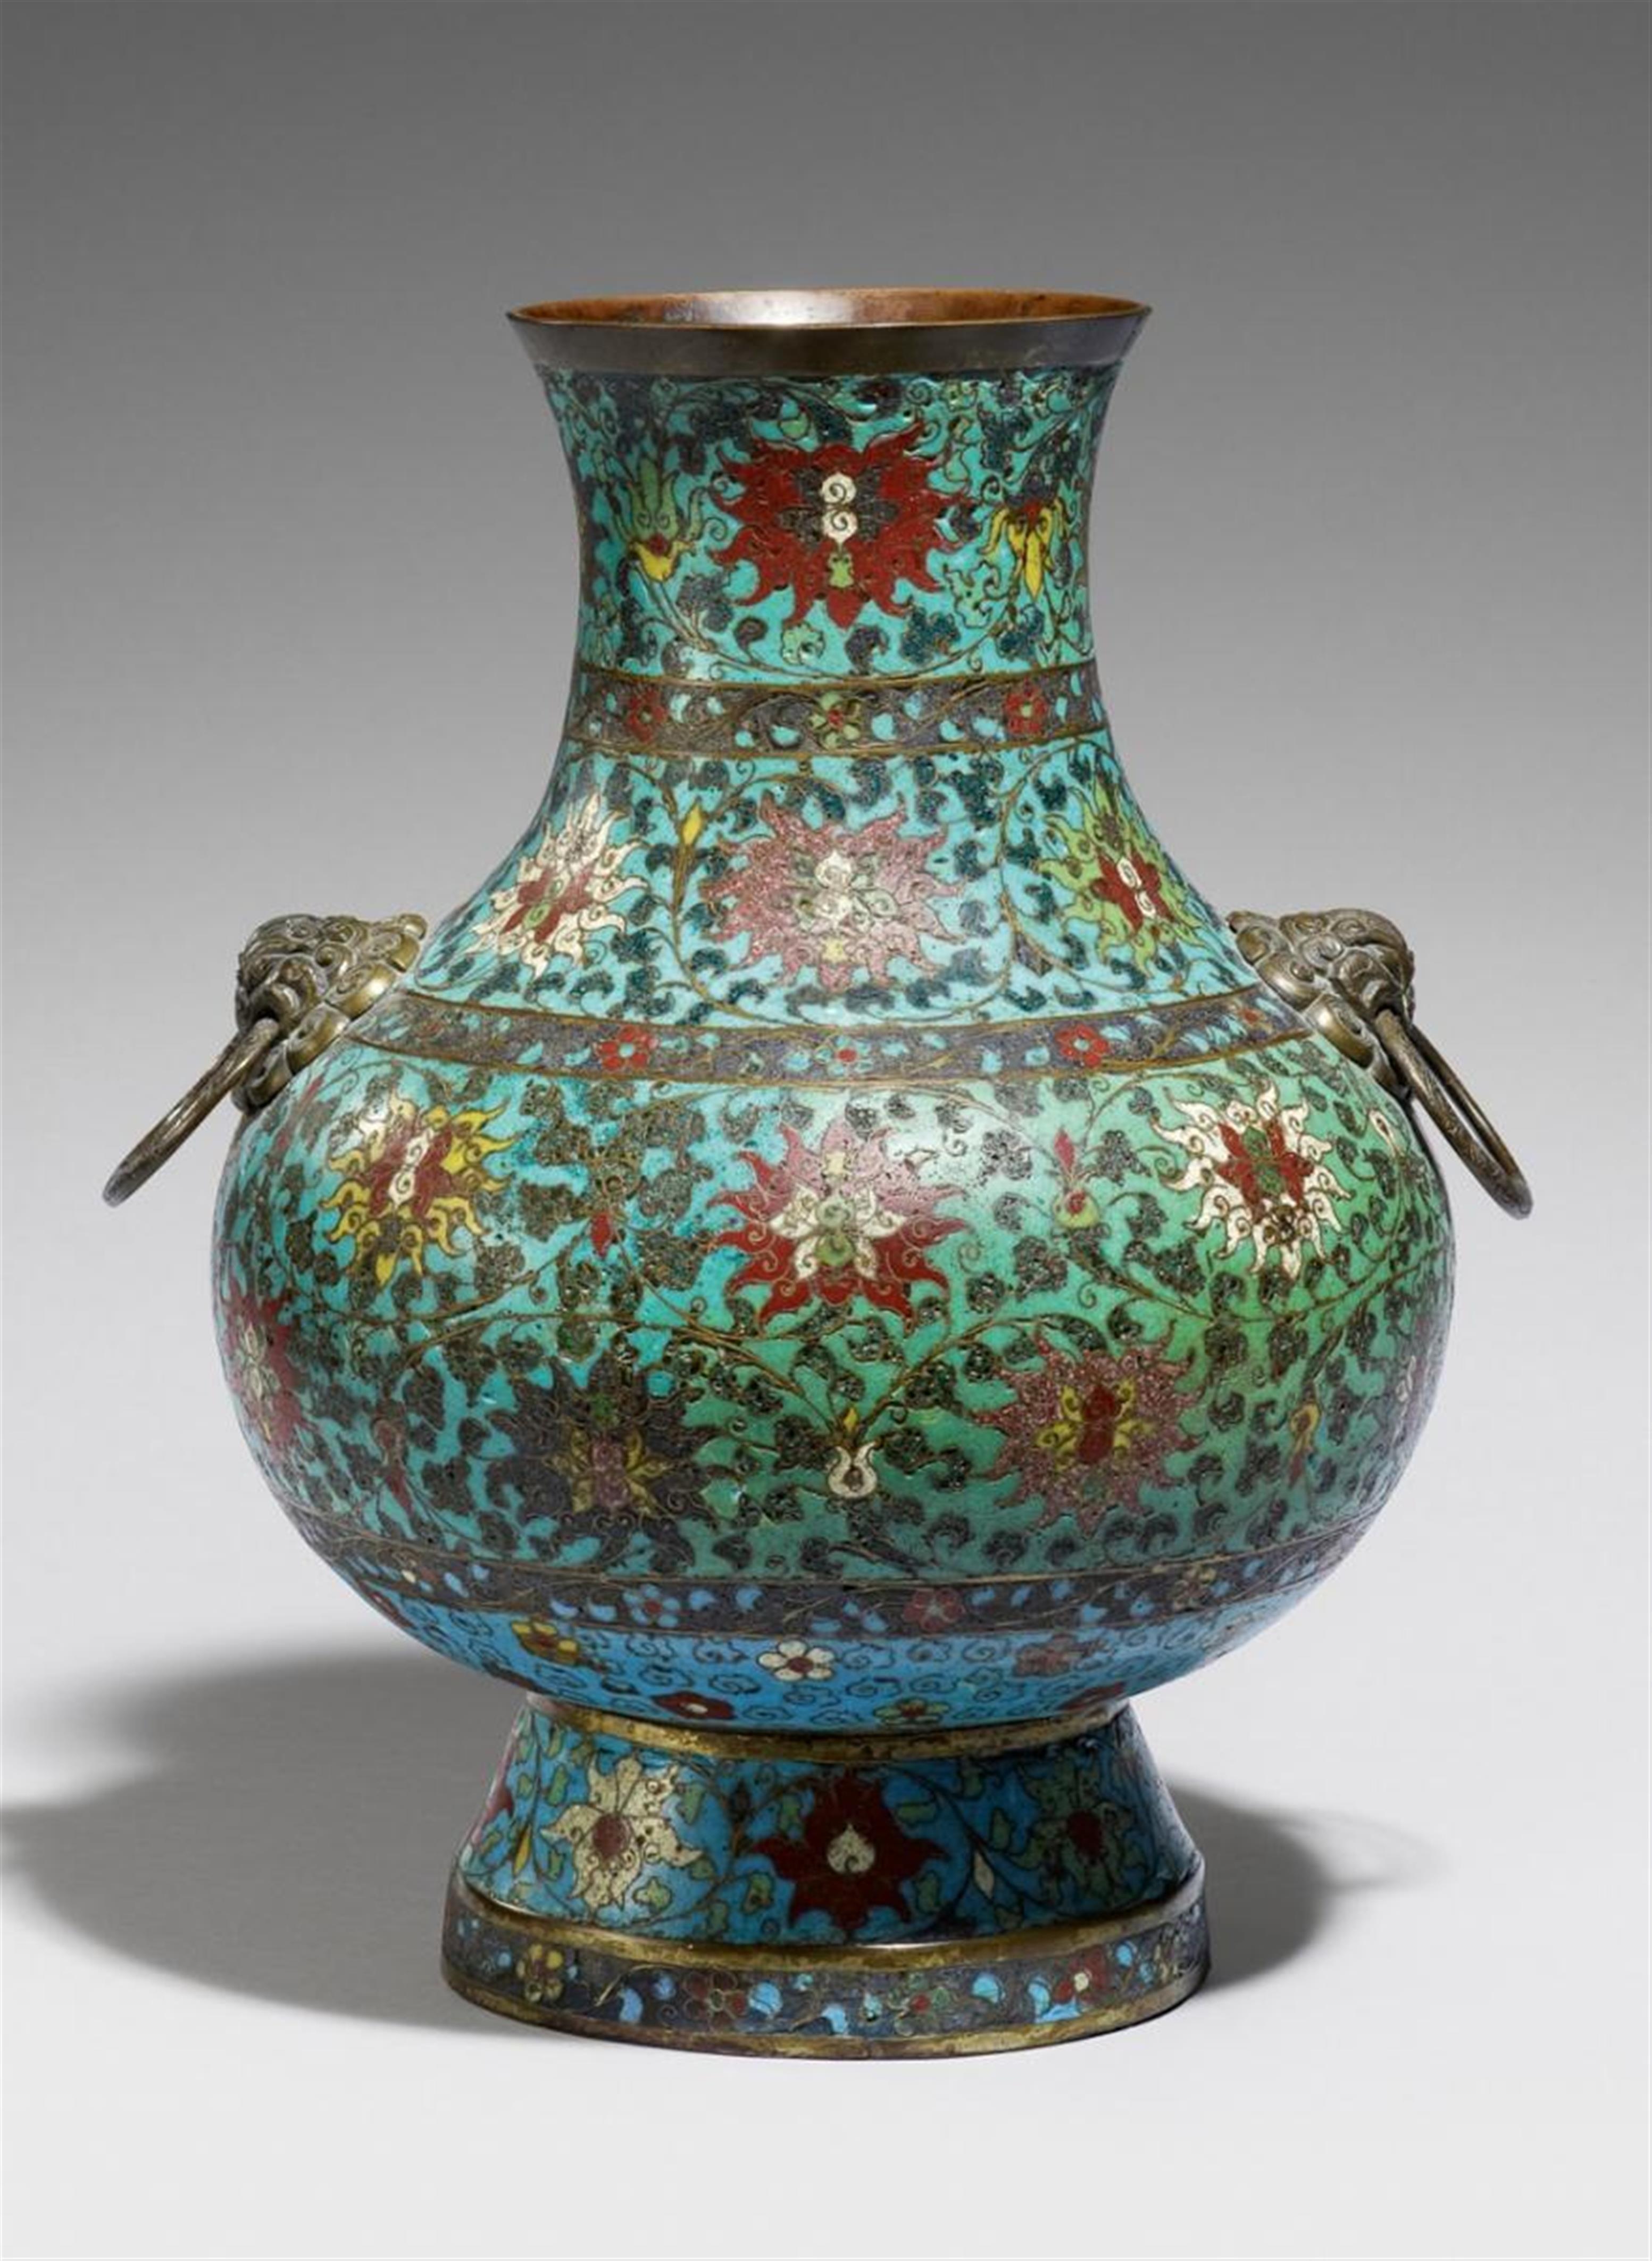 A large cloisonné enamel vase. Late 16th/first half 17th century - image-1